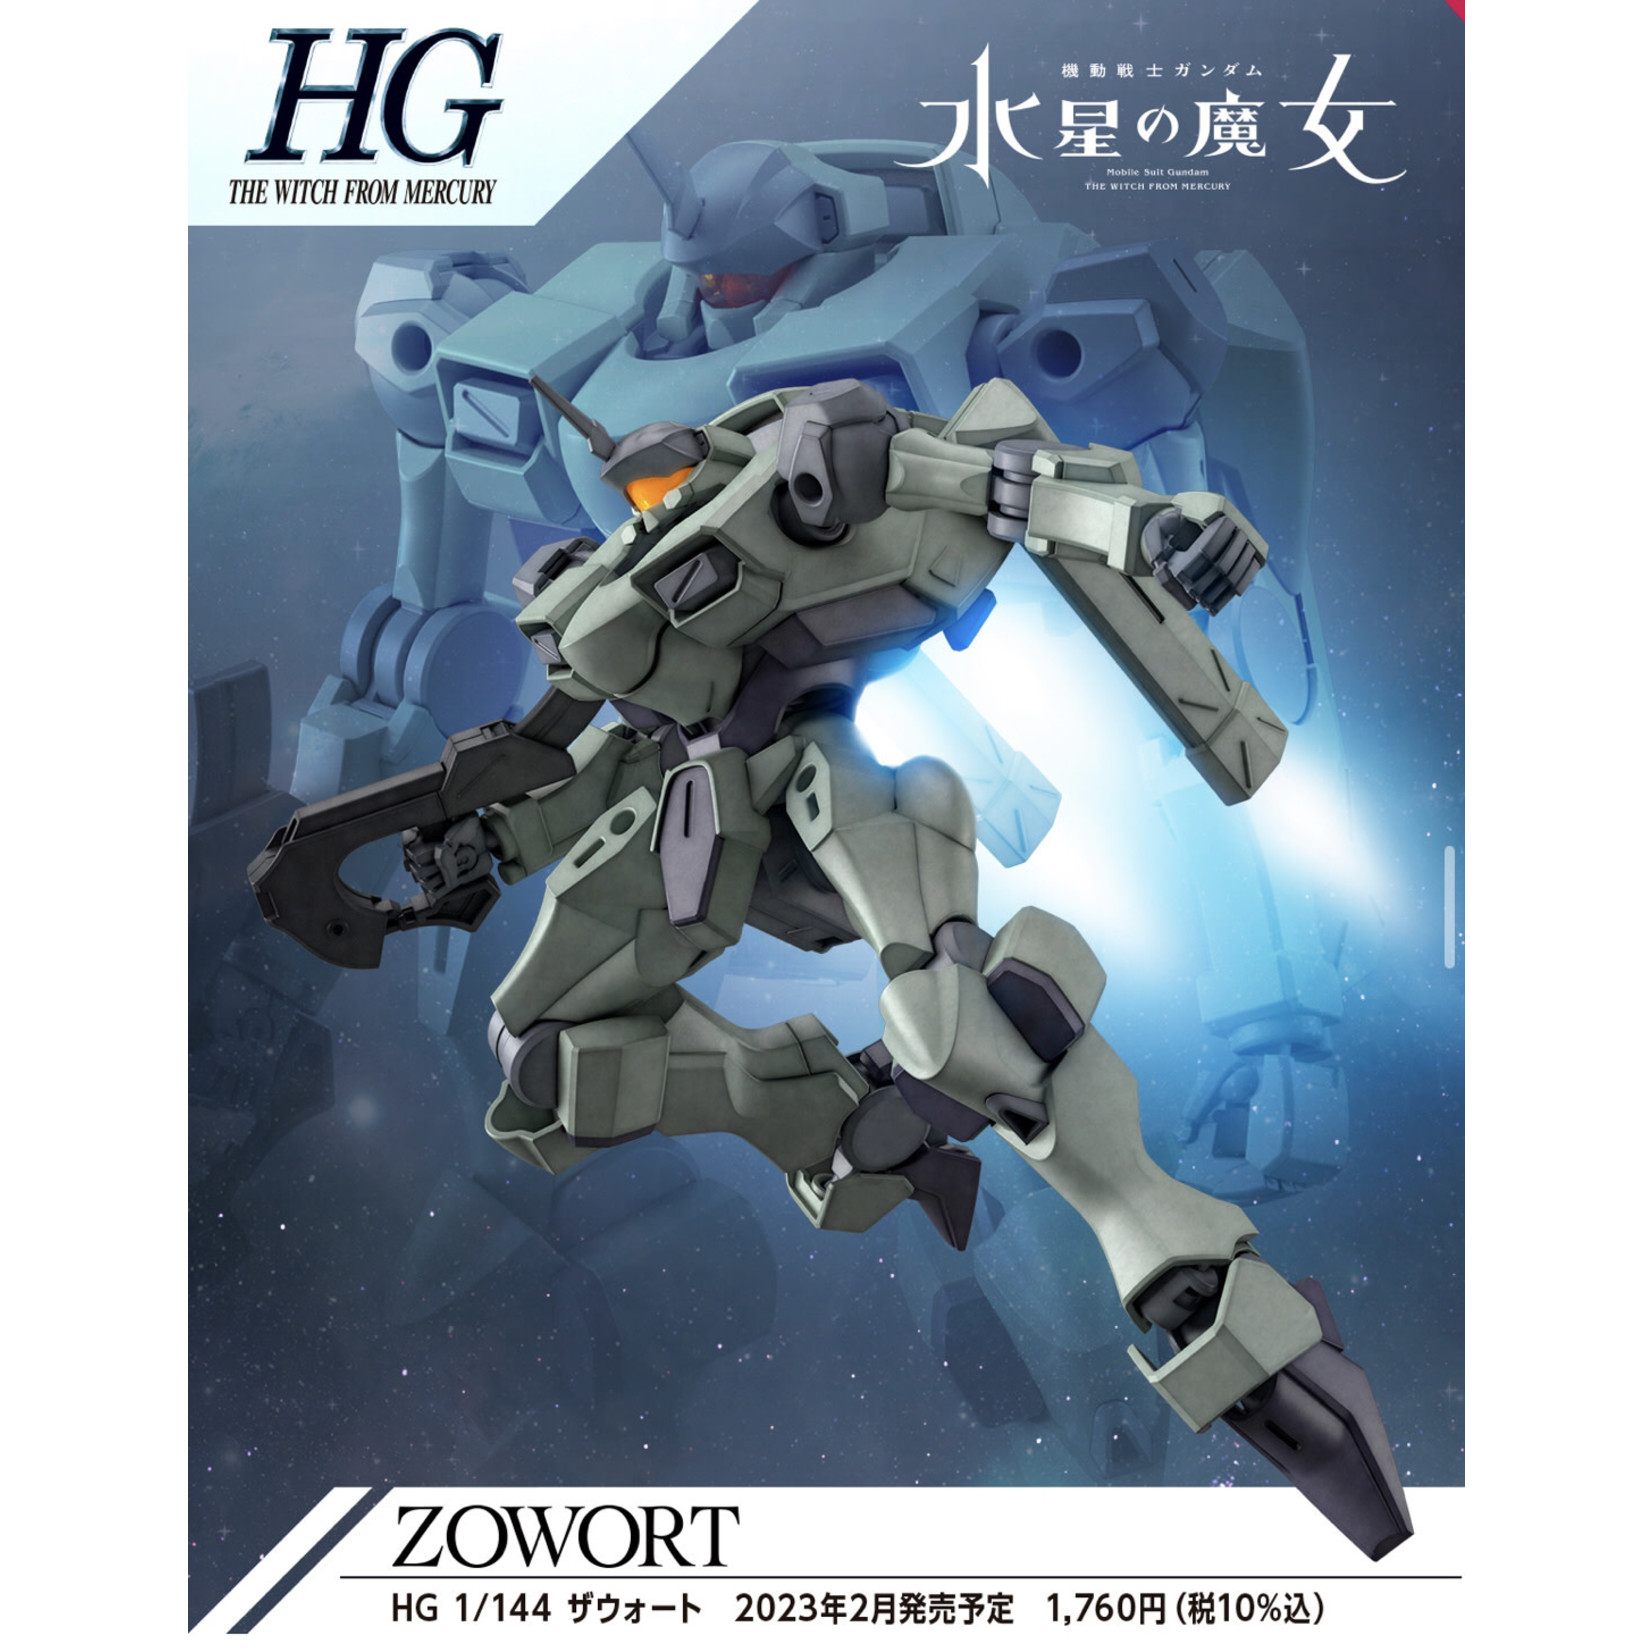 Bandai Bandai 2620604 HG #14 Zowort "The Witch from Mercury"